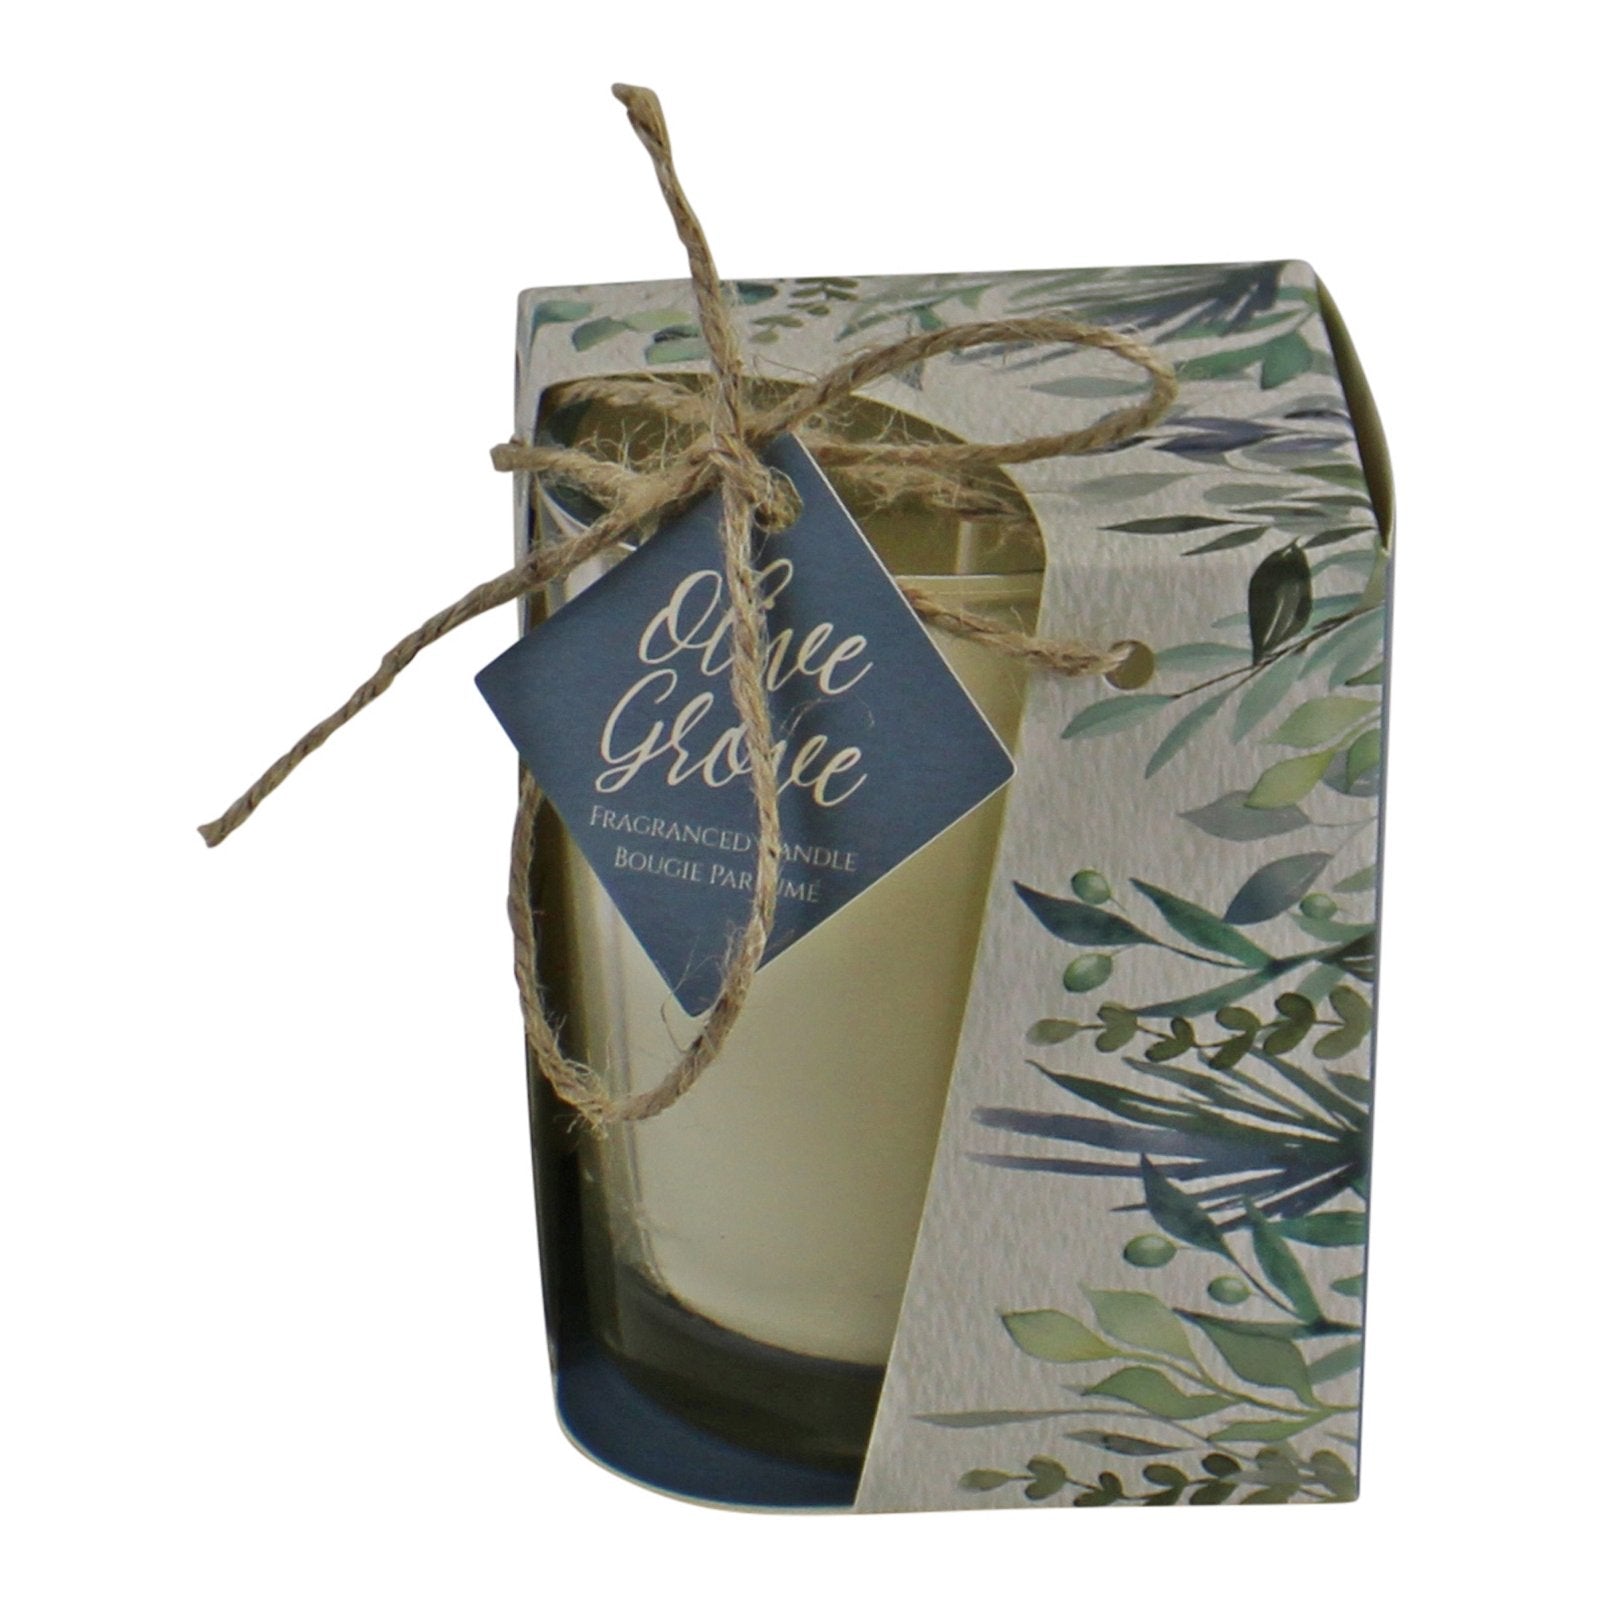 Olive Grove Fragranced Candle In Gift Box